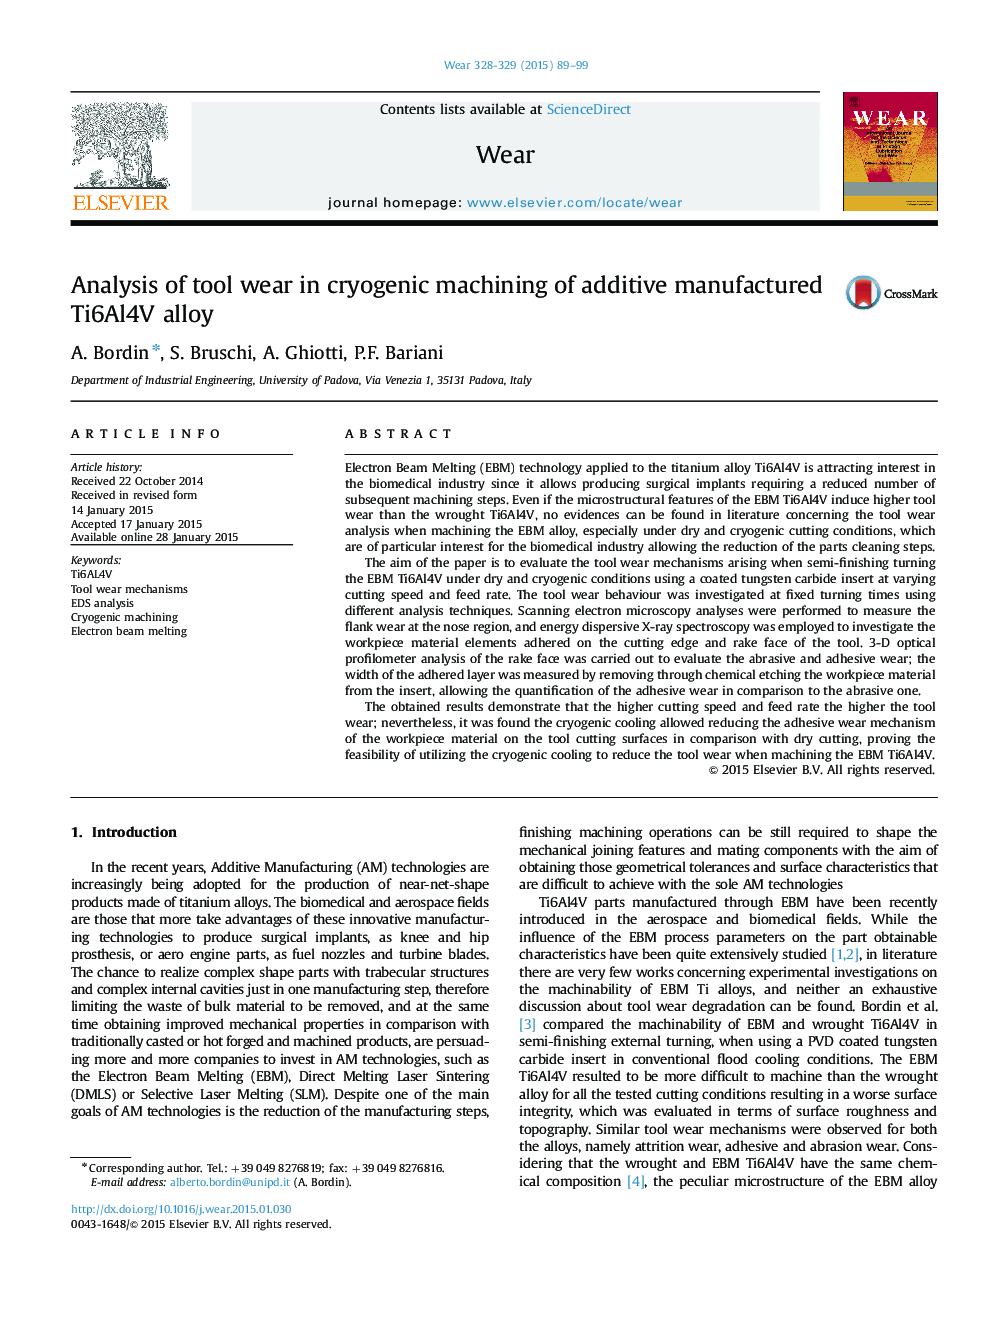 Analysis of tool wear in cryogenic machining of additive manufactured Ti6Al4V alloy